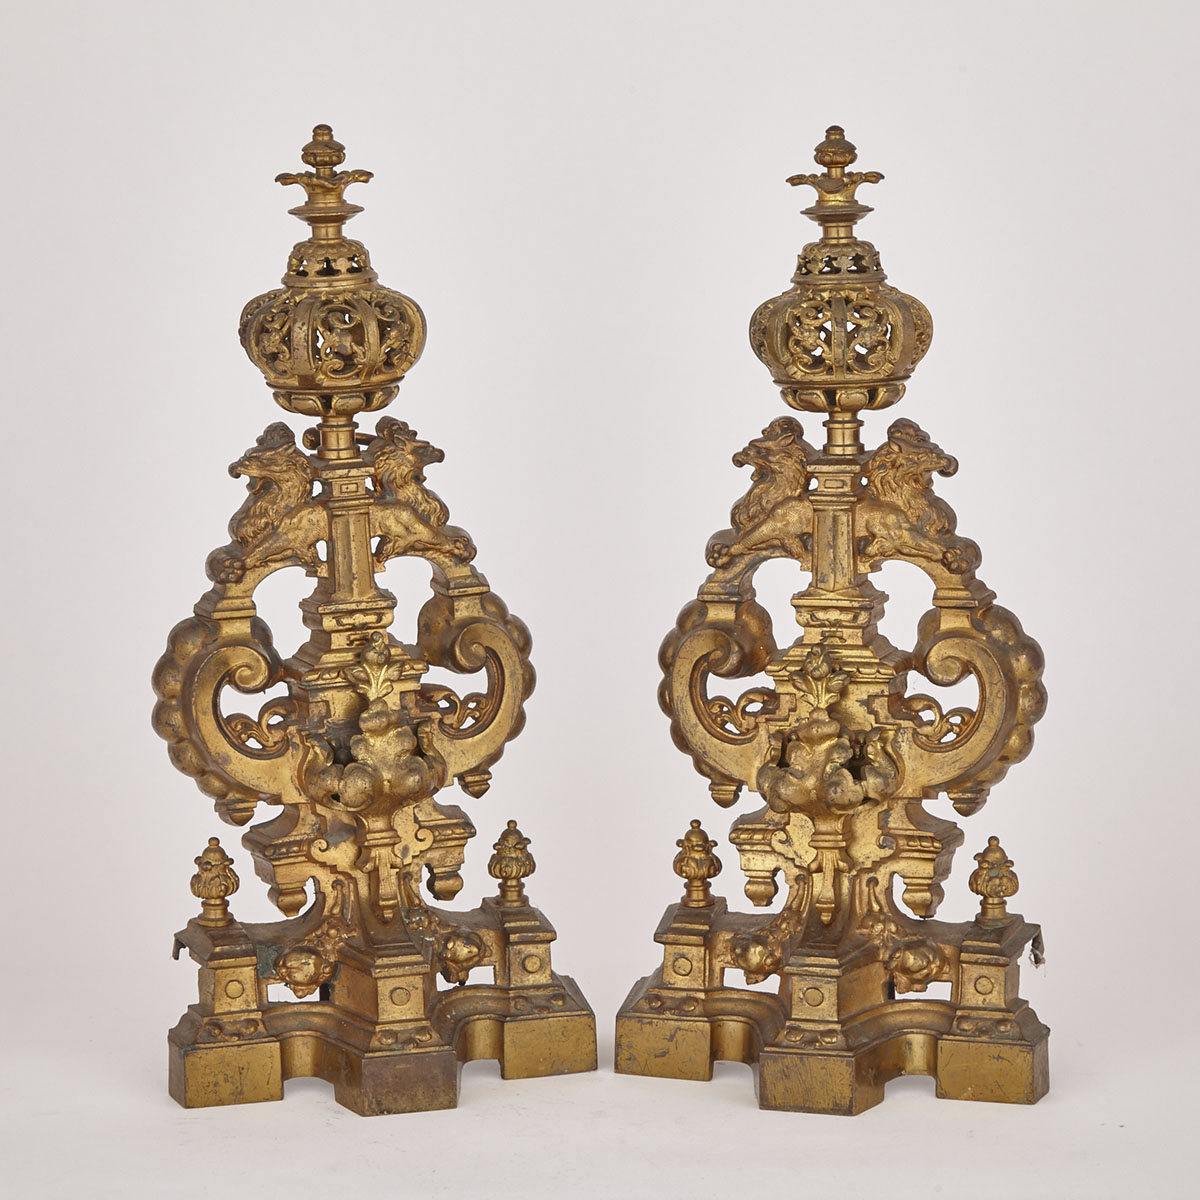 Pair of English Renaissance Revival Gilt and Lacquered Brass Armorial Andirons, 19th century